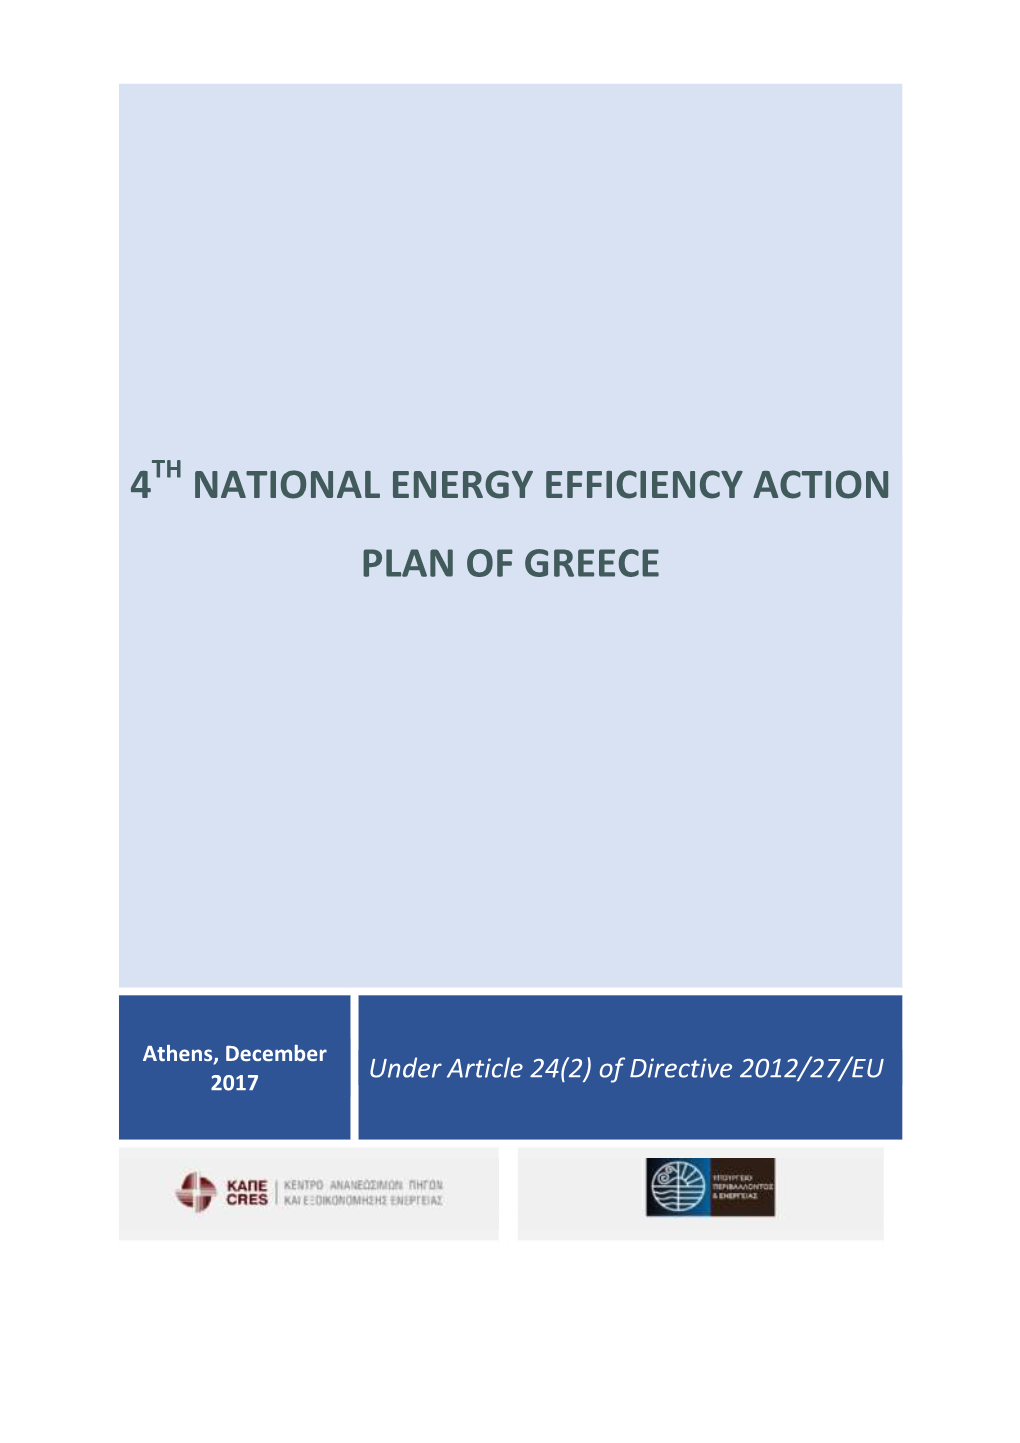 4 Th National Energy Efficiency Action Plan of Greece